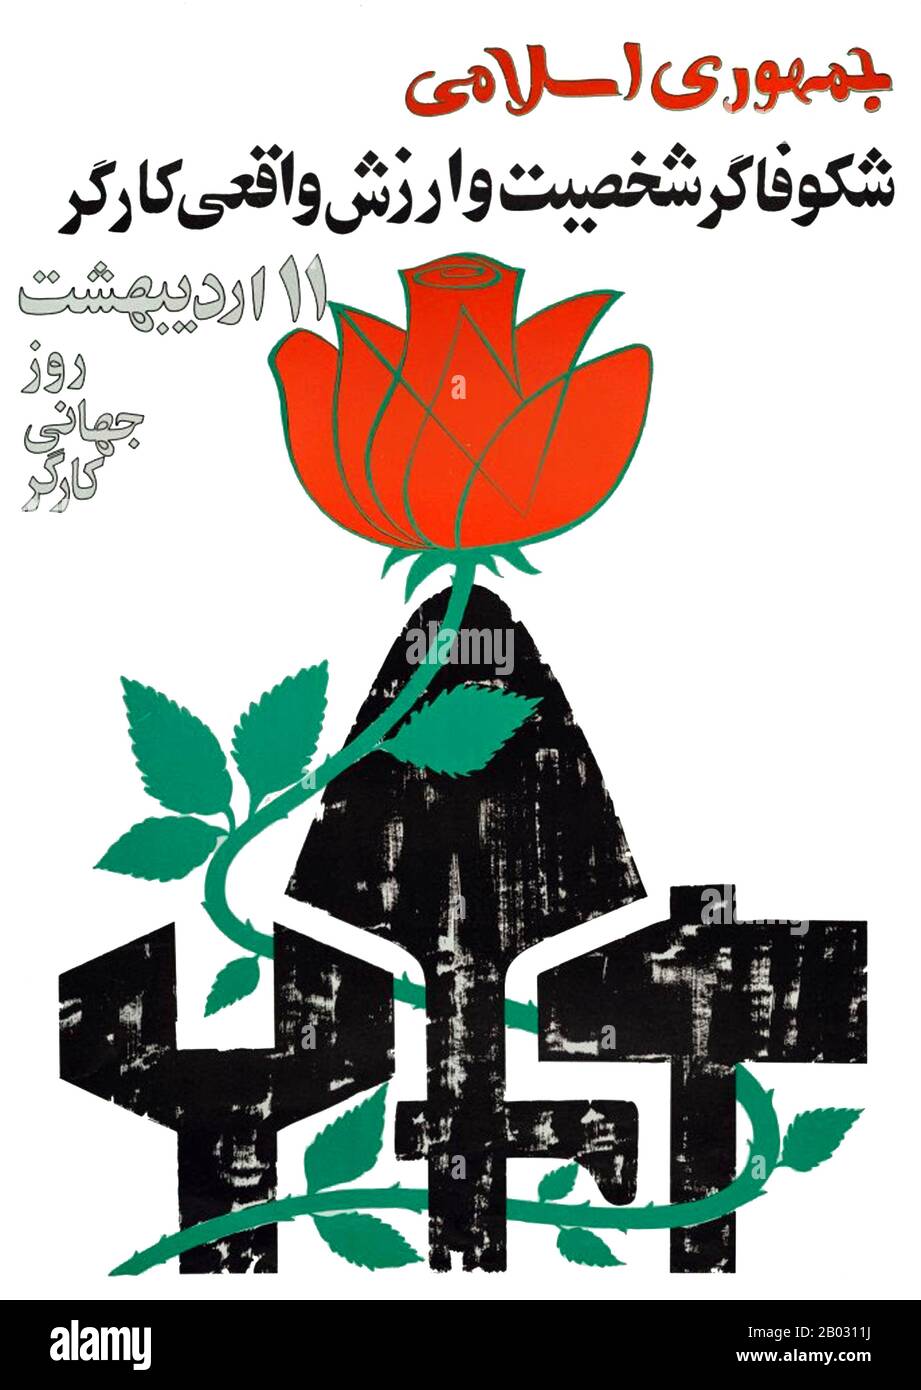 The Islamic Republican Party or IRP, was the only-legal political party in Iran, formed in mid-1979 to help the Iranian Revolution and Ayatollah Khomeini establish theocracy in Iran. It was disbanded in May 1987 due to internal conflicts. Stock Photo